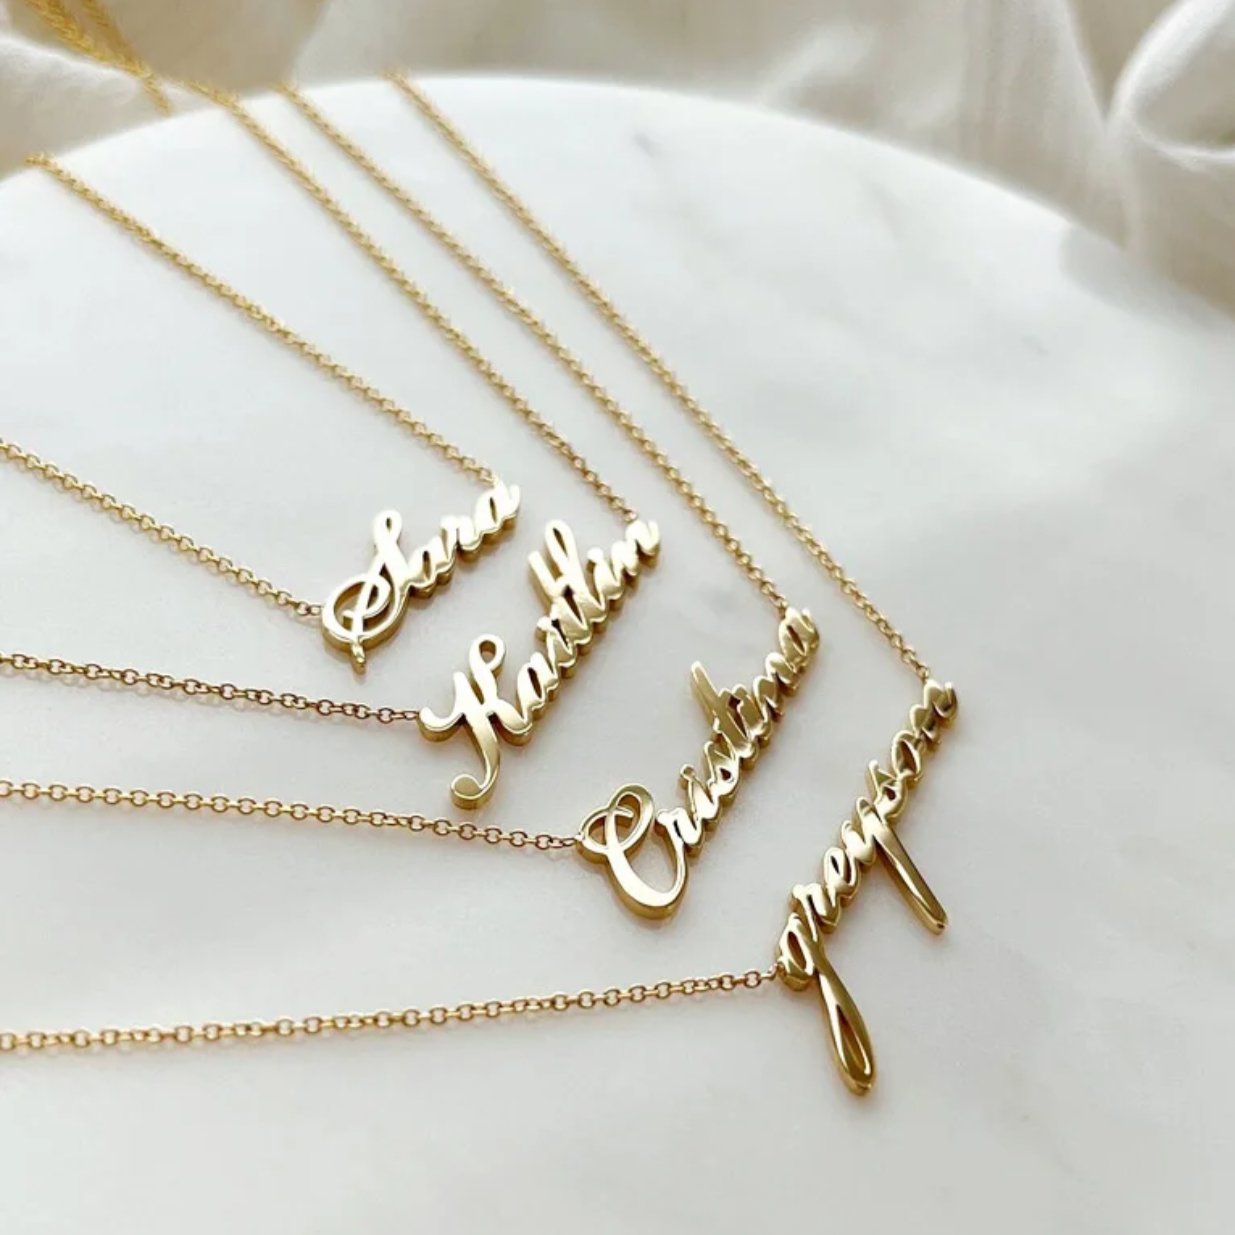 Personalized 18k Gold Name Necklace